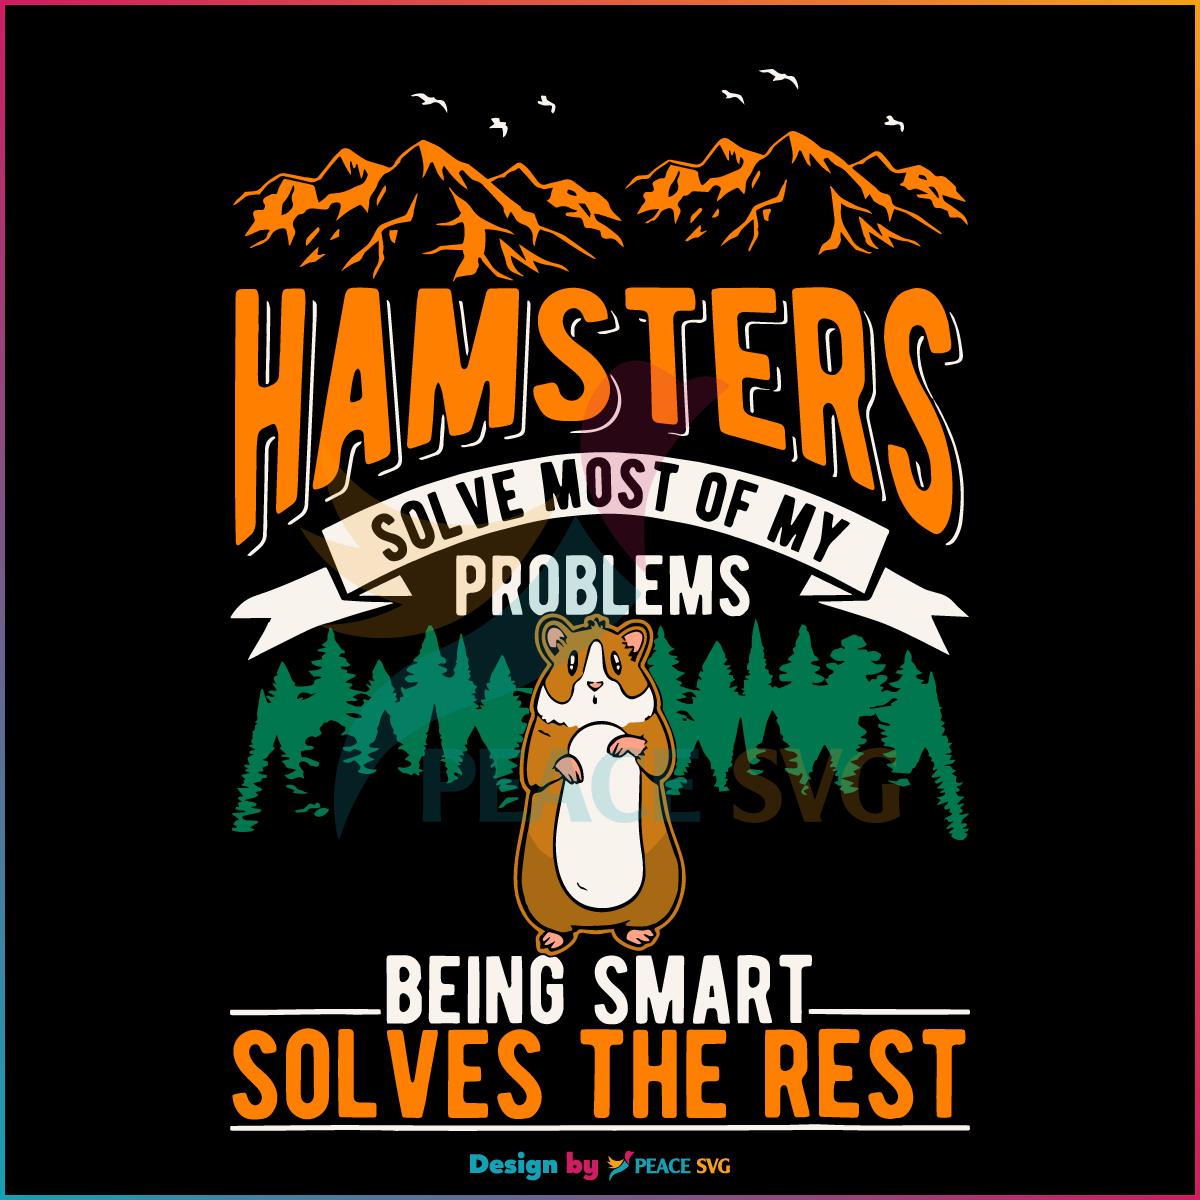 hamsters-solve-most-of-my-problems-being-smart-solves-the-rest-svg